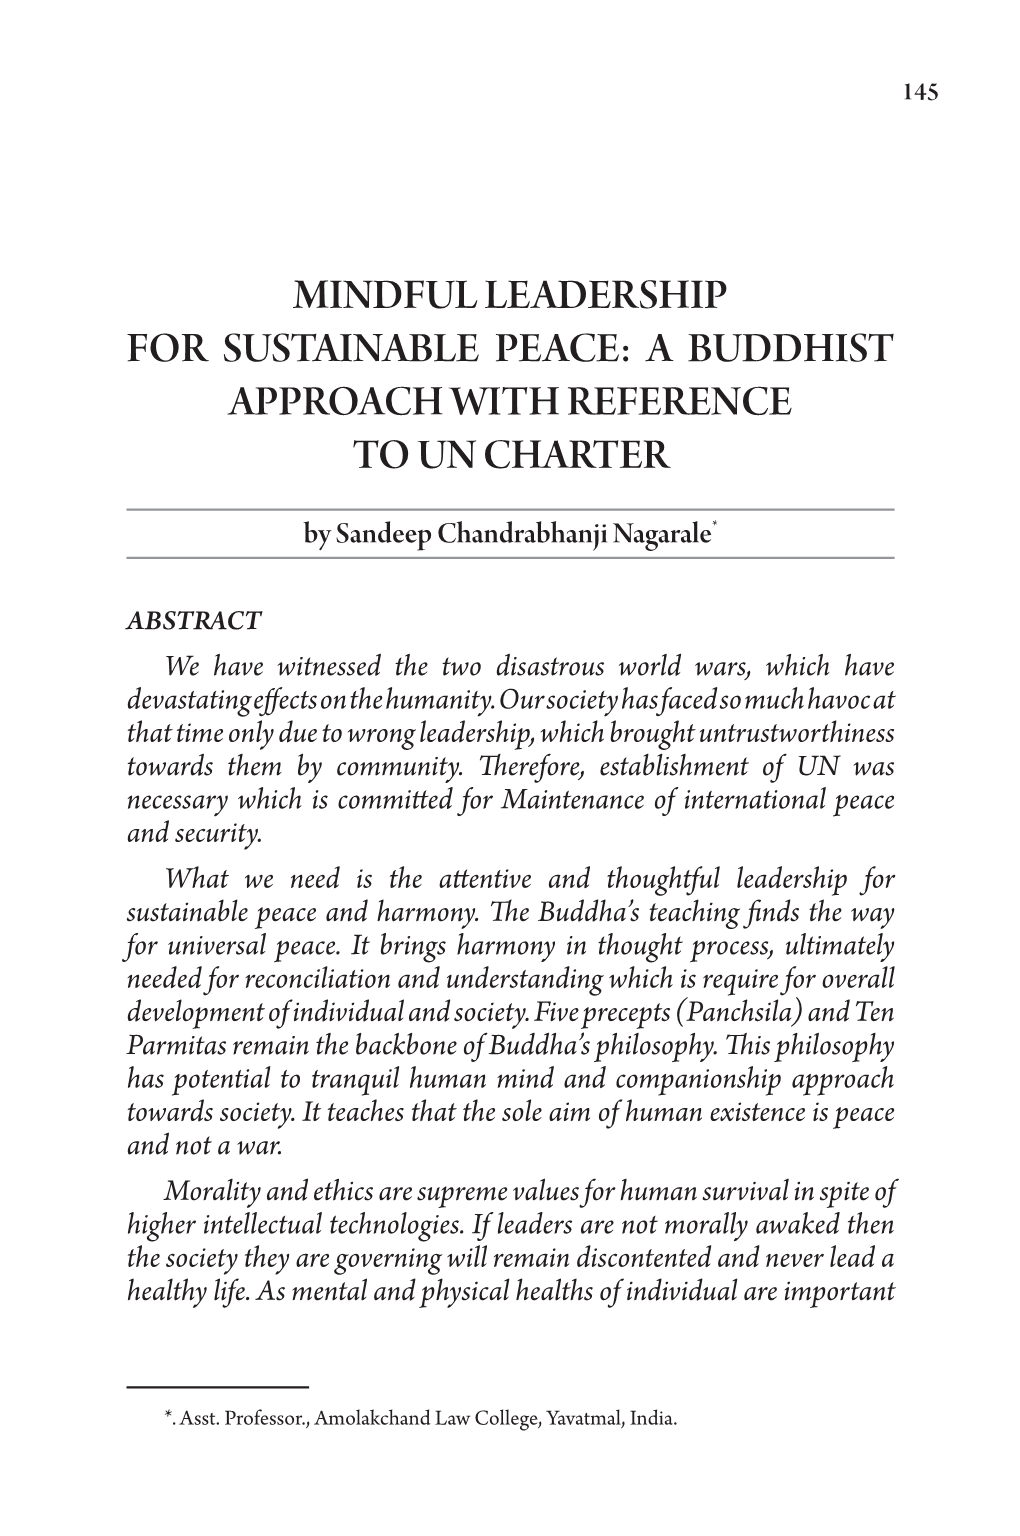 Mindful Leadership for Sustainable Peace: a Buddhist Approach with Reference to Un Charter